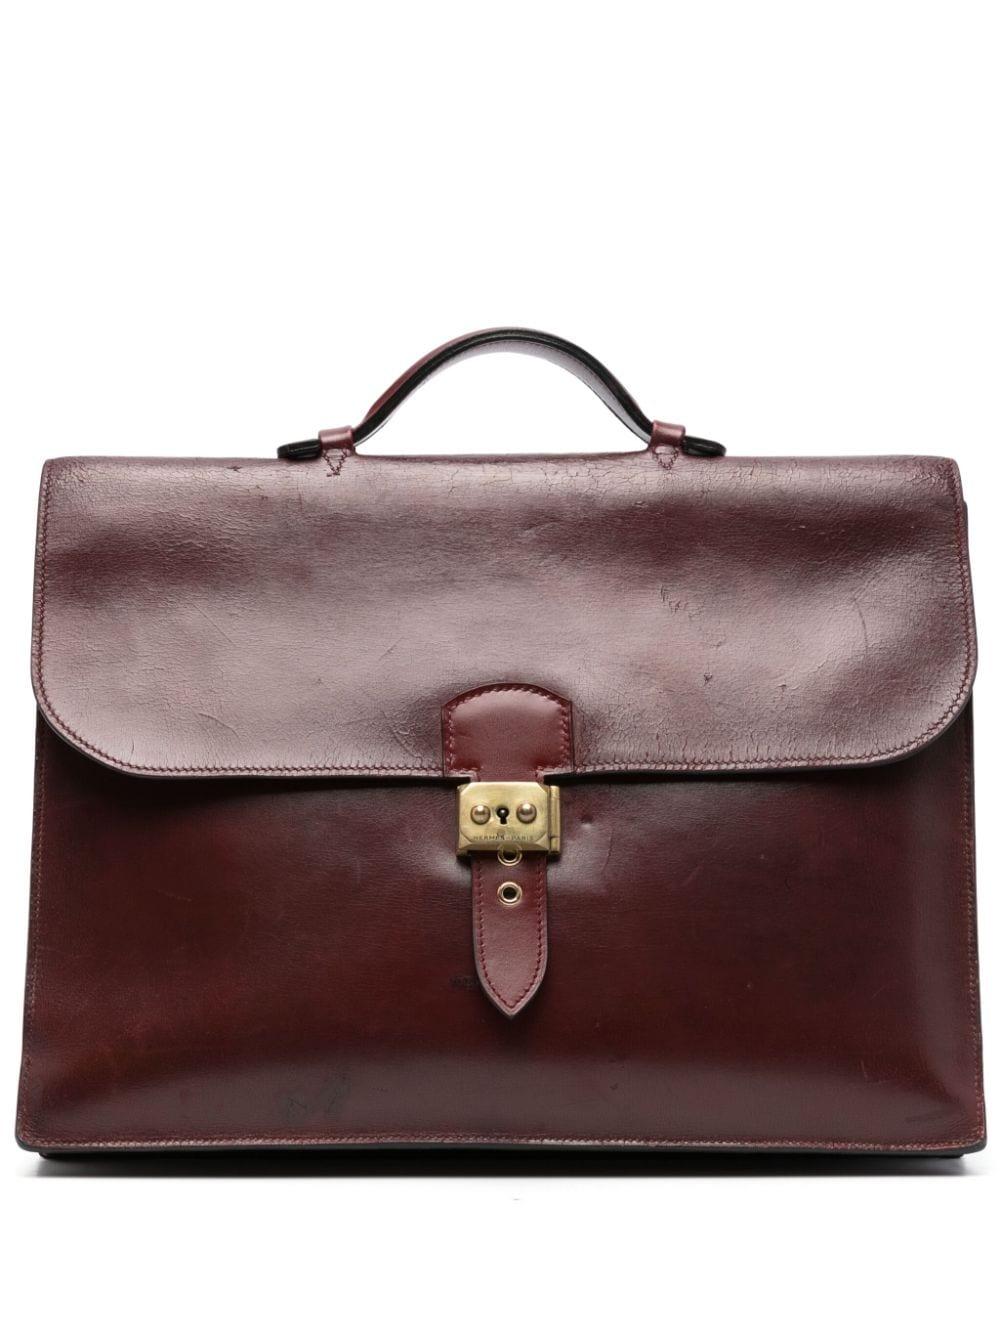 Bordeaux Box Leather Hermes Sac A Depeches Briefcase For Sale 2